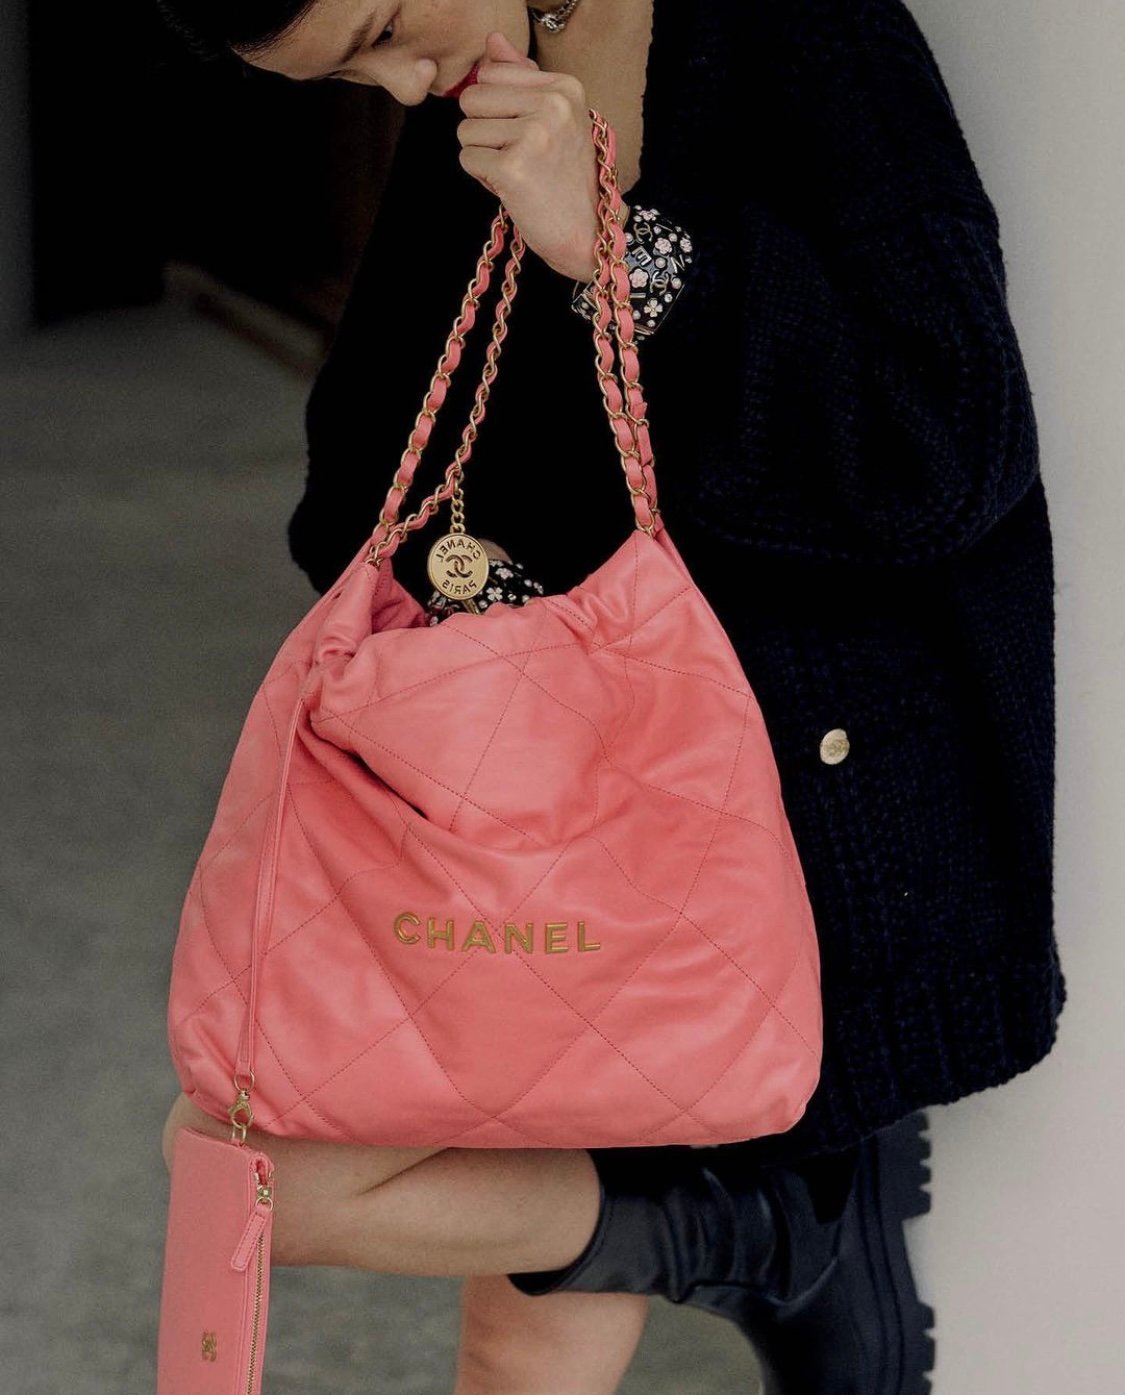 Everything You Need to Know About the Chanel 22 Bag - PurseBop